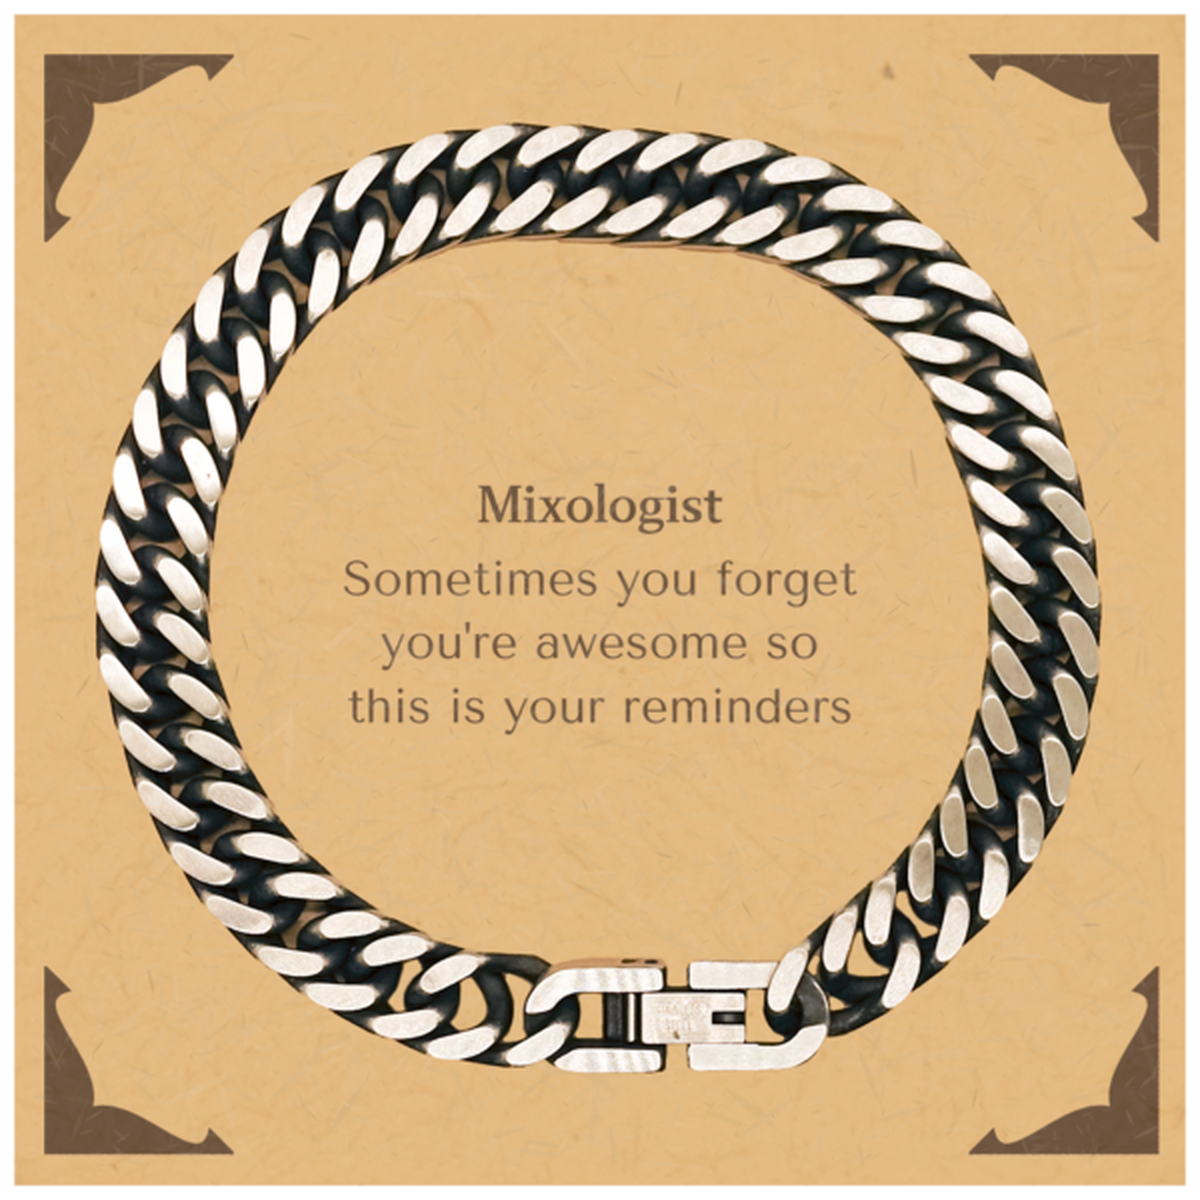 Sentimental Mixologist Cuban Link Chain Bracelet, Mixologist Sometimes you forget you're awesome so this is your reminders, Graduation Christmas Birthday Gifts for Mixologist, Men, Women, Coworkers